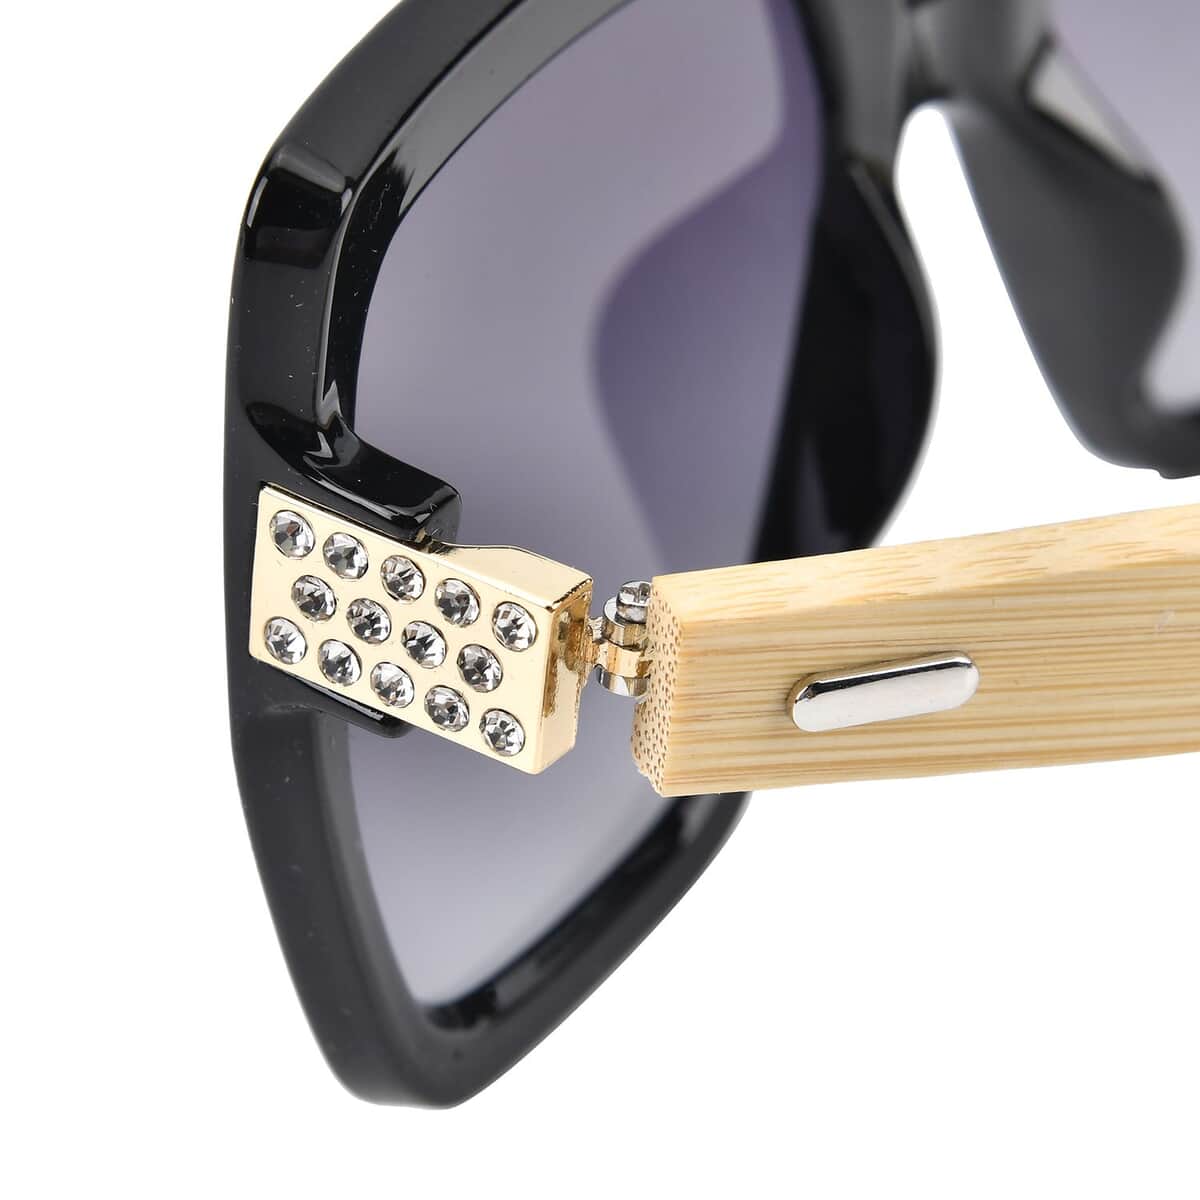 UV400 and Polarized PC Sunglasses with Bamboo Temples, Pouch and Case image number 4